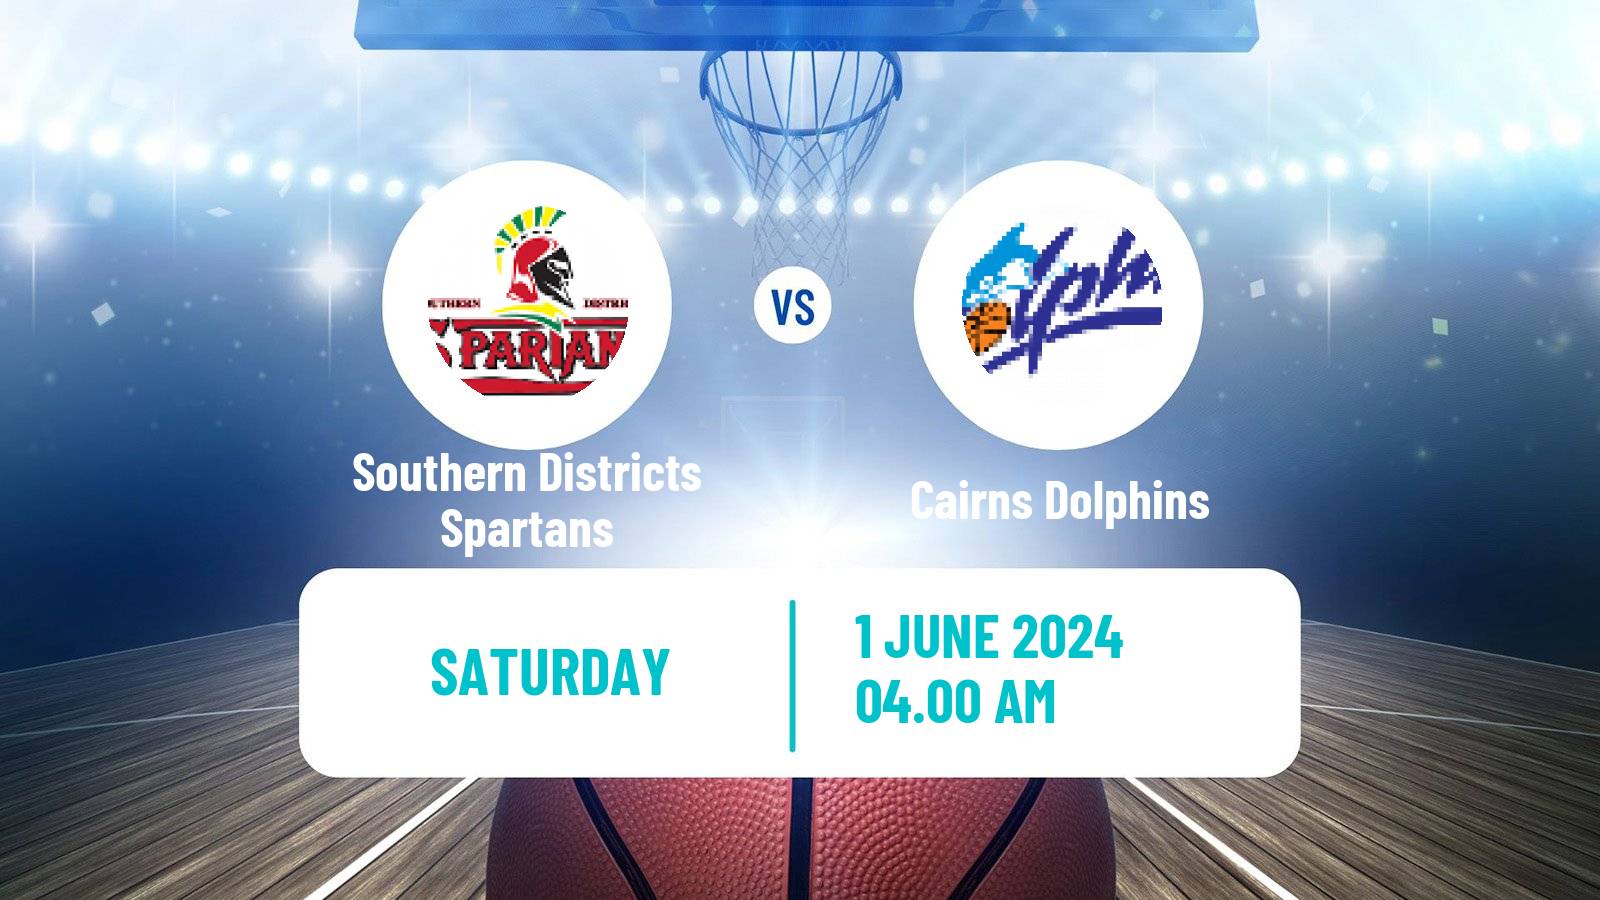 Basketball Australian NBL1 North Women Southern Districts Spartans - Cairns Dolphins